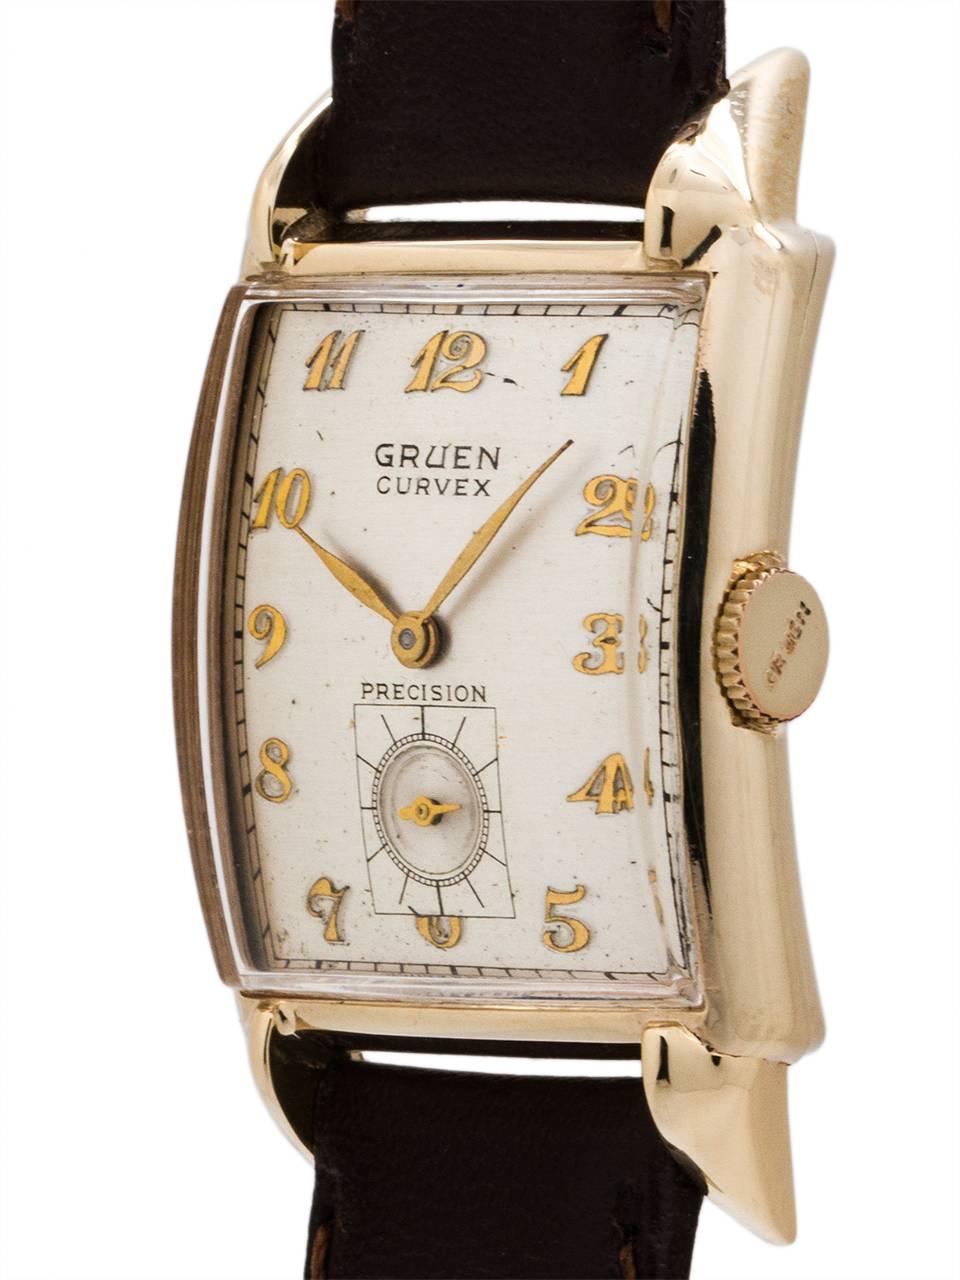 Gruen Curvex 14K YG circa 1940’s featuring 24 X 41mm elongated case with sloping lugs and curved low dome crystal. With pleasing condition original satin dial with raised gold indexes and gilt leaf style hands. Powered by 17 jewel manual wind